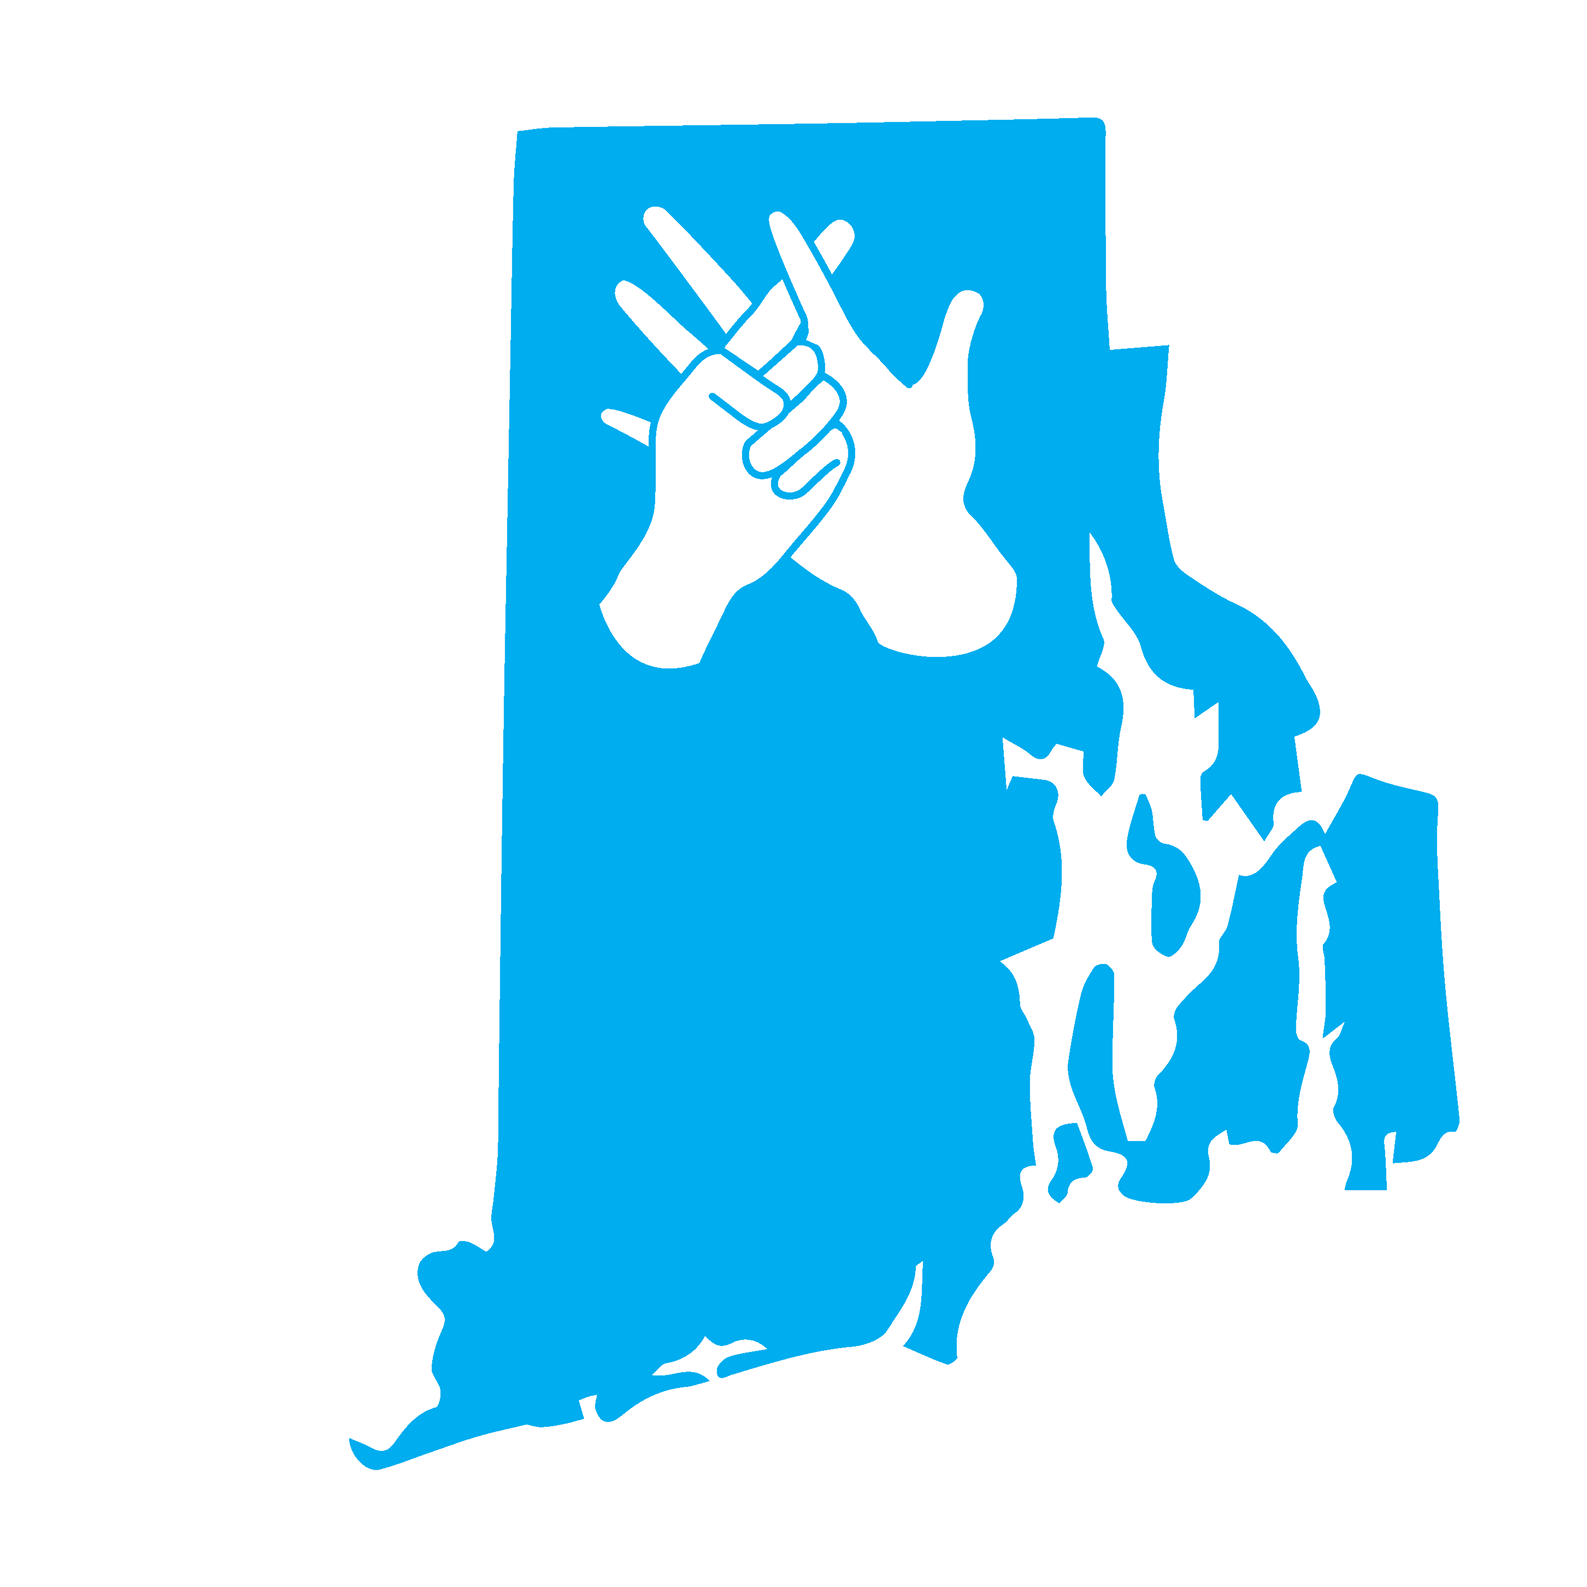 a logo for the sign language initiatives showing the sign for start on a siloutte of RI